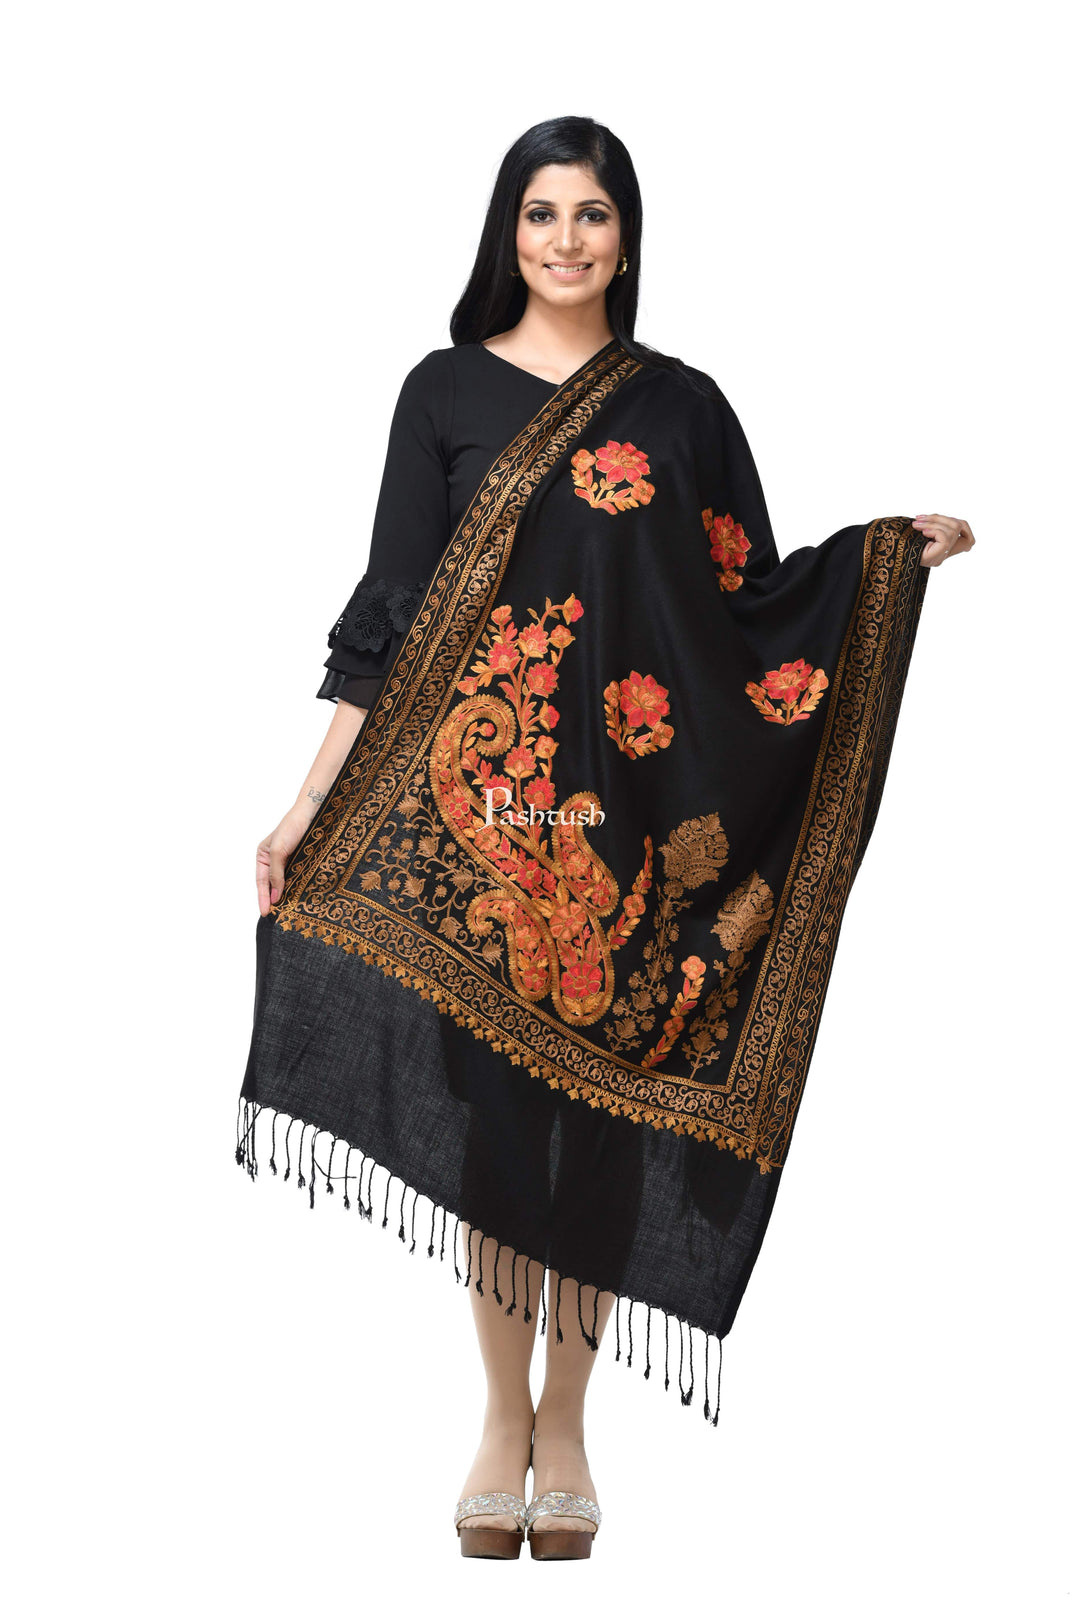 Pashwool Womens Stoles and Scarves Scarf Pashwool, Womens Kashmiri Aari Embroidery Stole, Soft Bamboo, Black